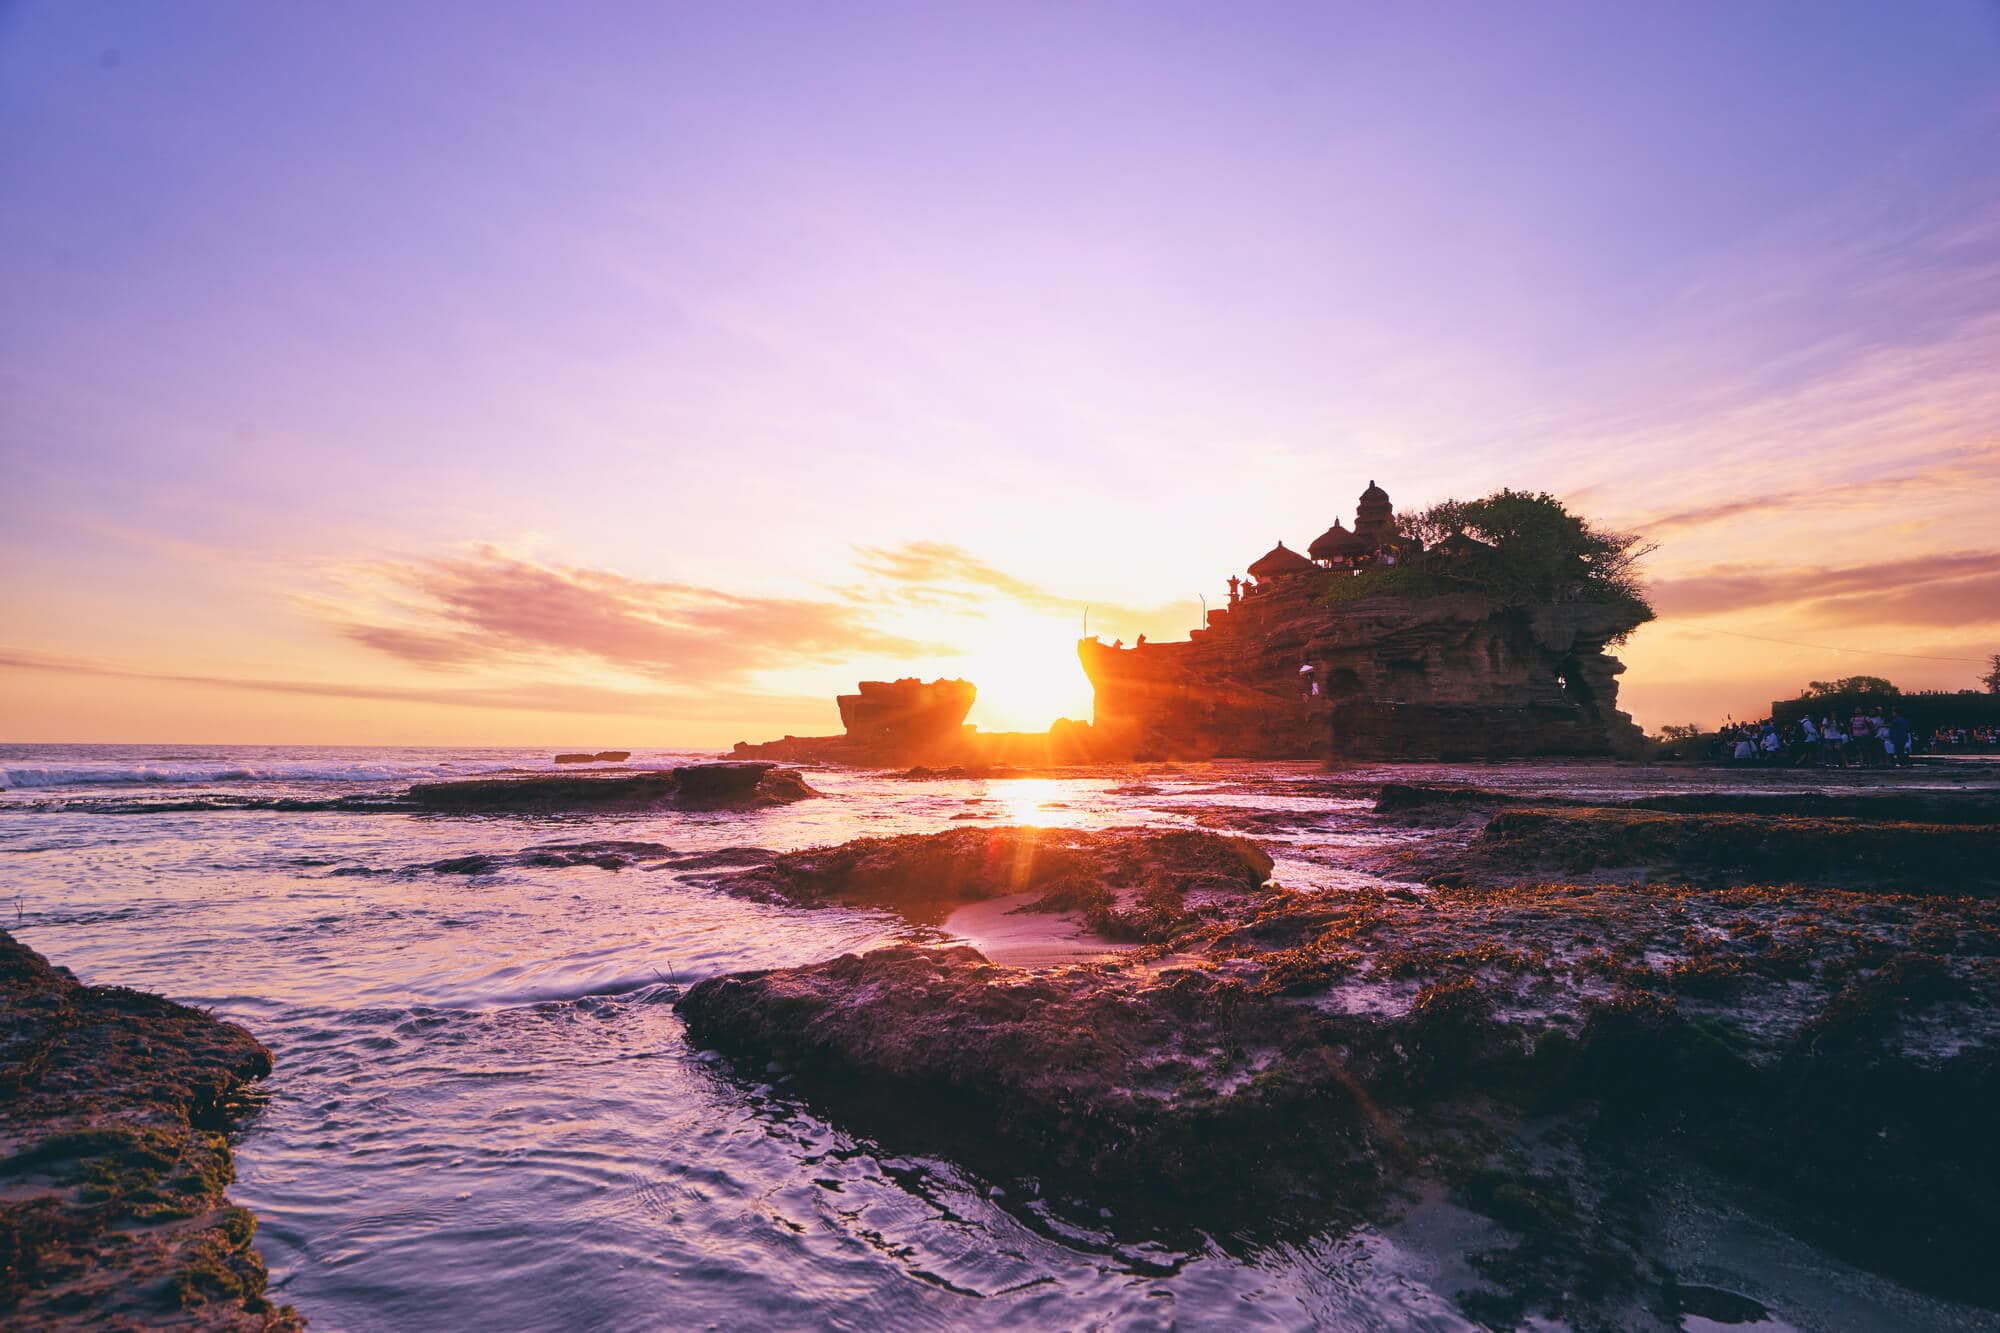 Tanah Lot Temple in Canggu. Don't stay in only one place in Bali.